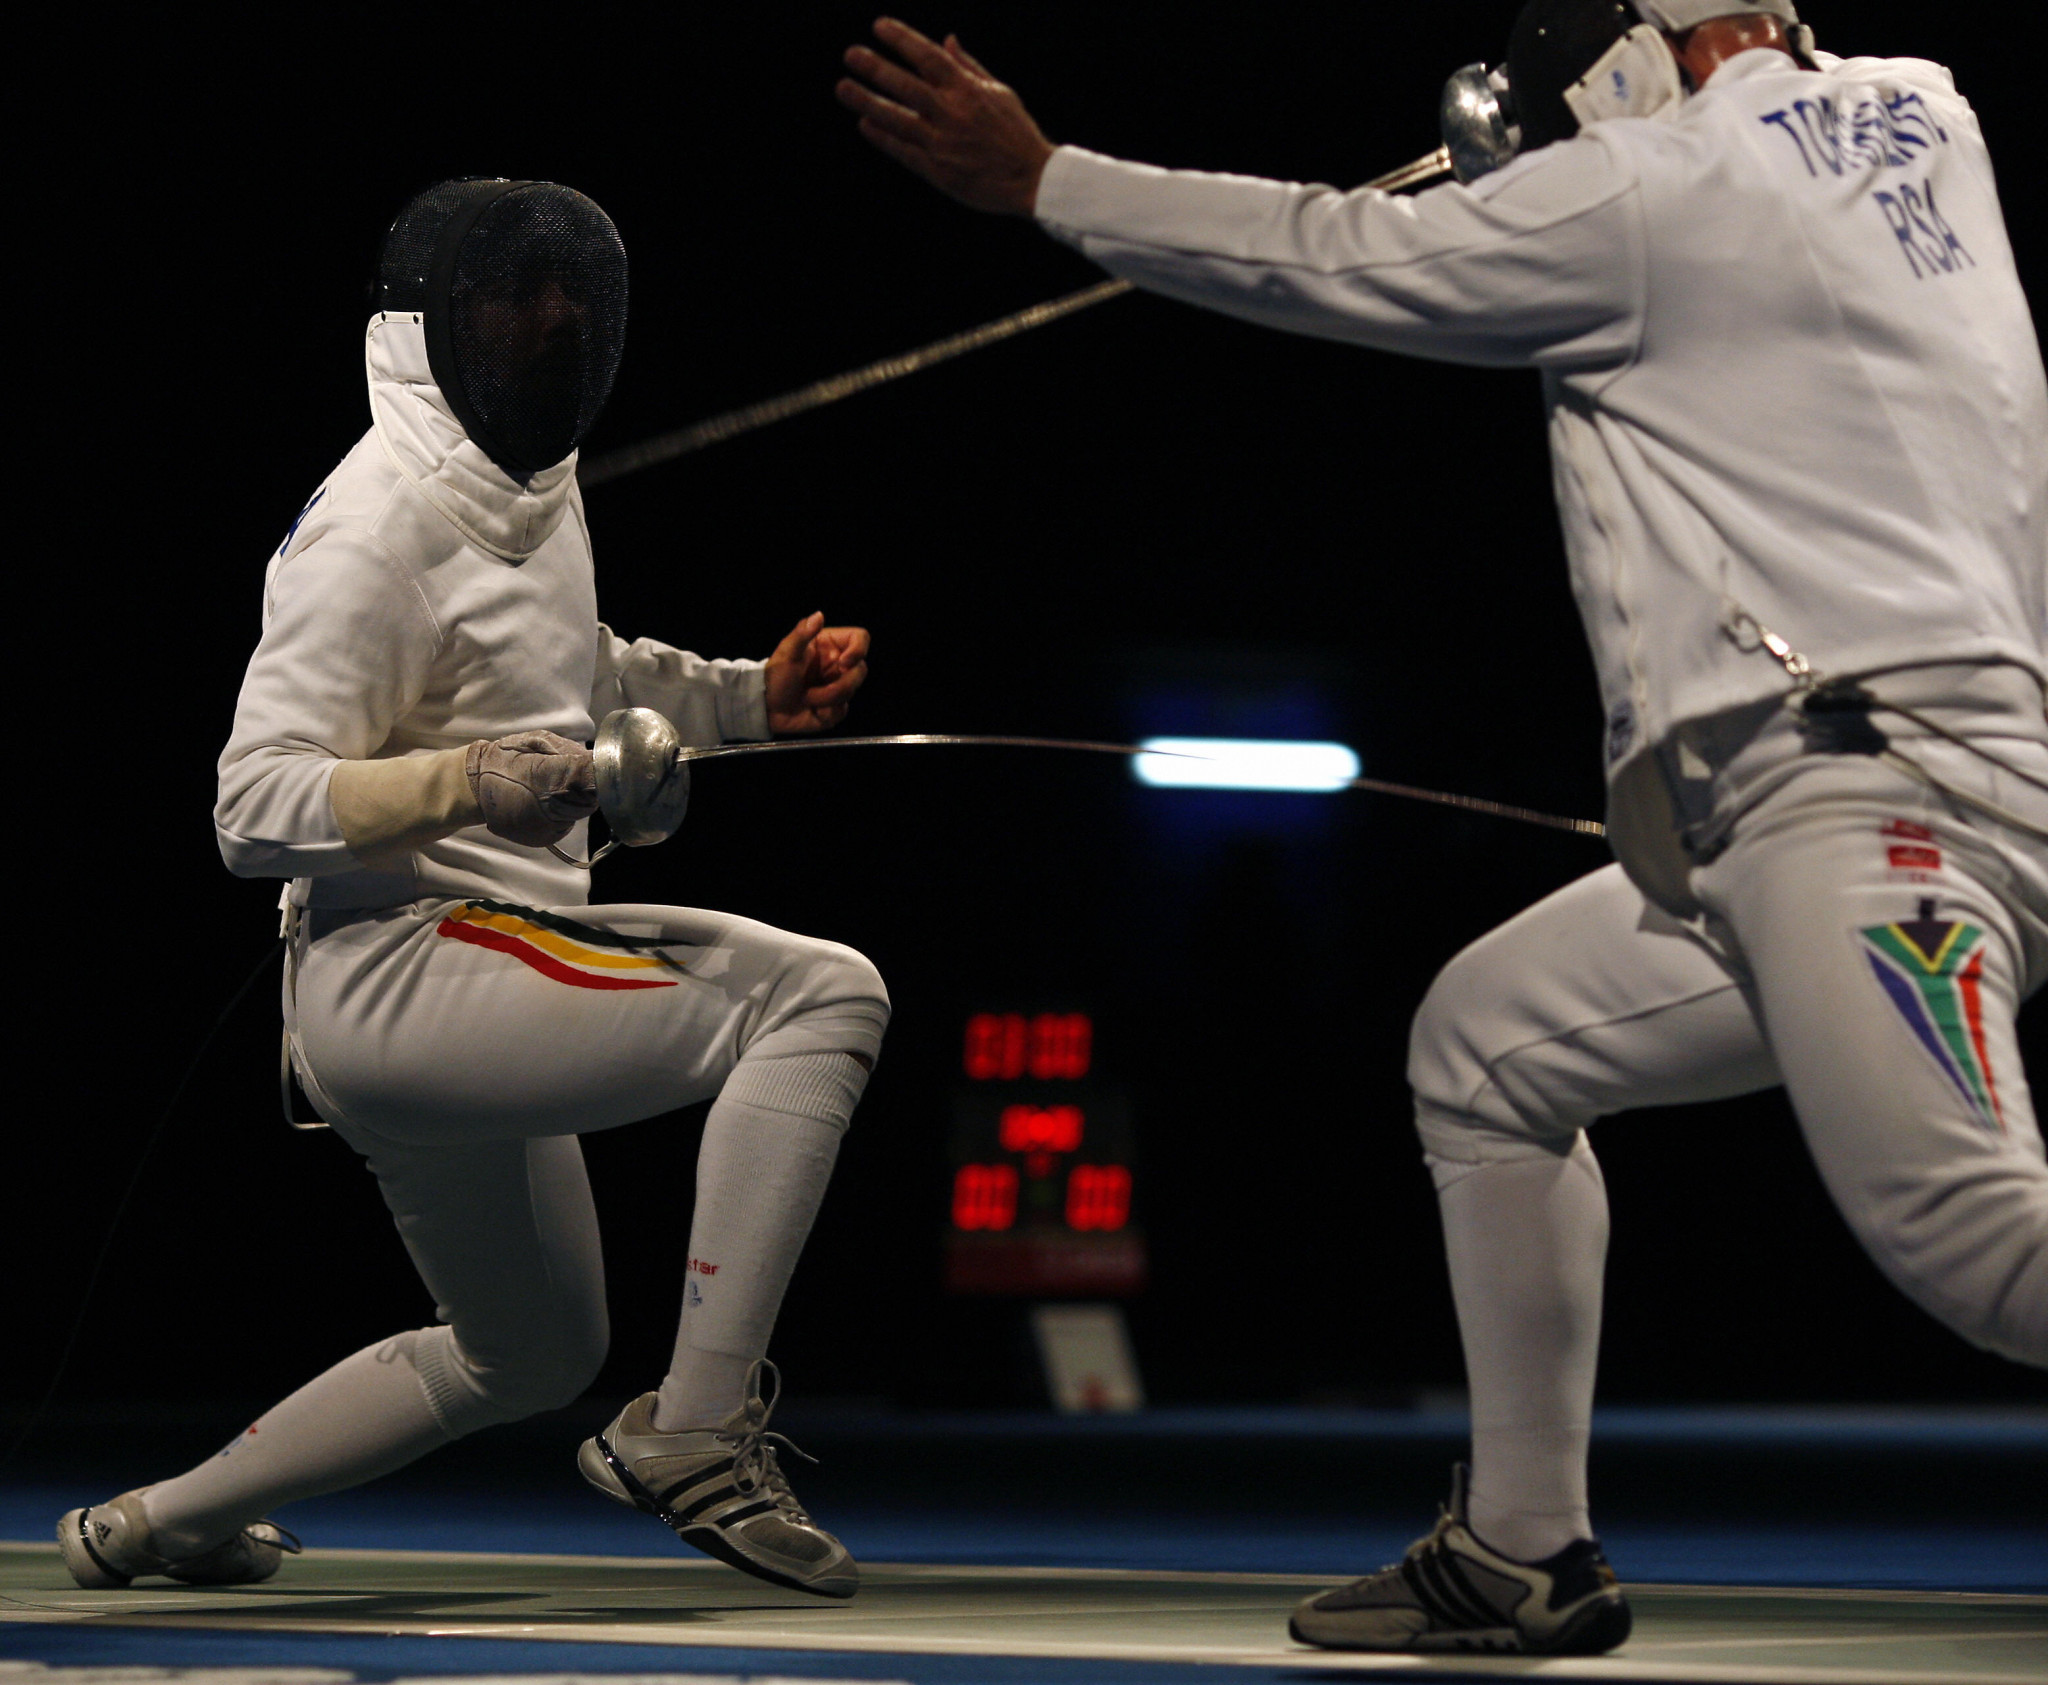 SASCOC pays compensation to fencer Barrett over Rio 2016 omission